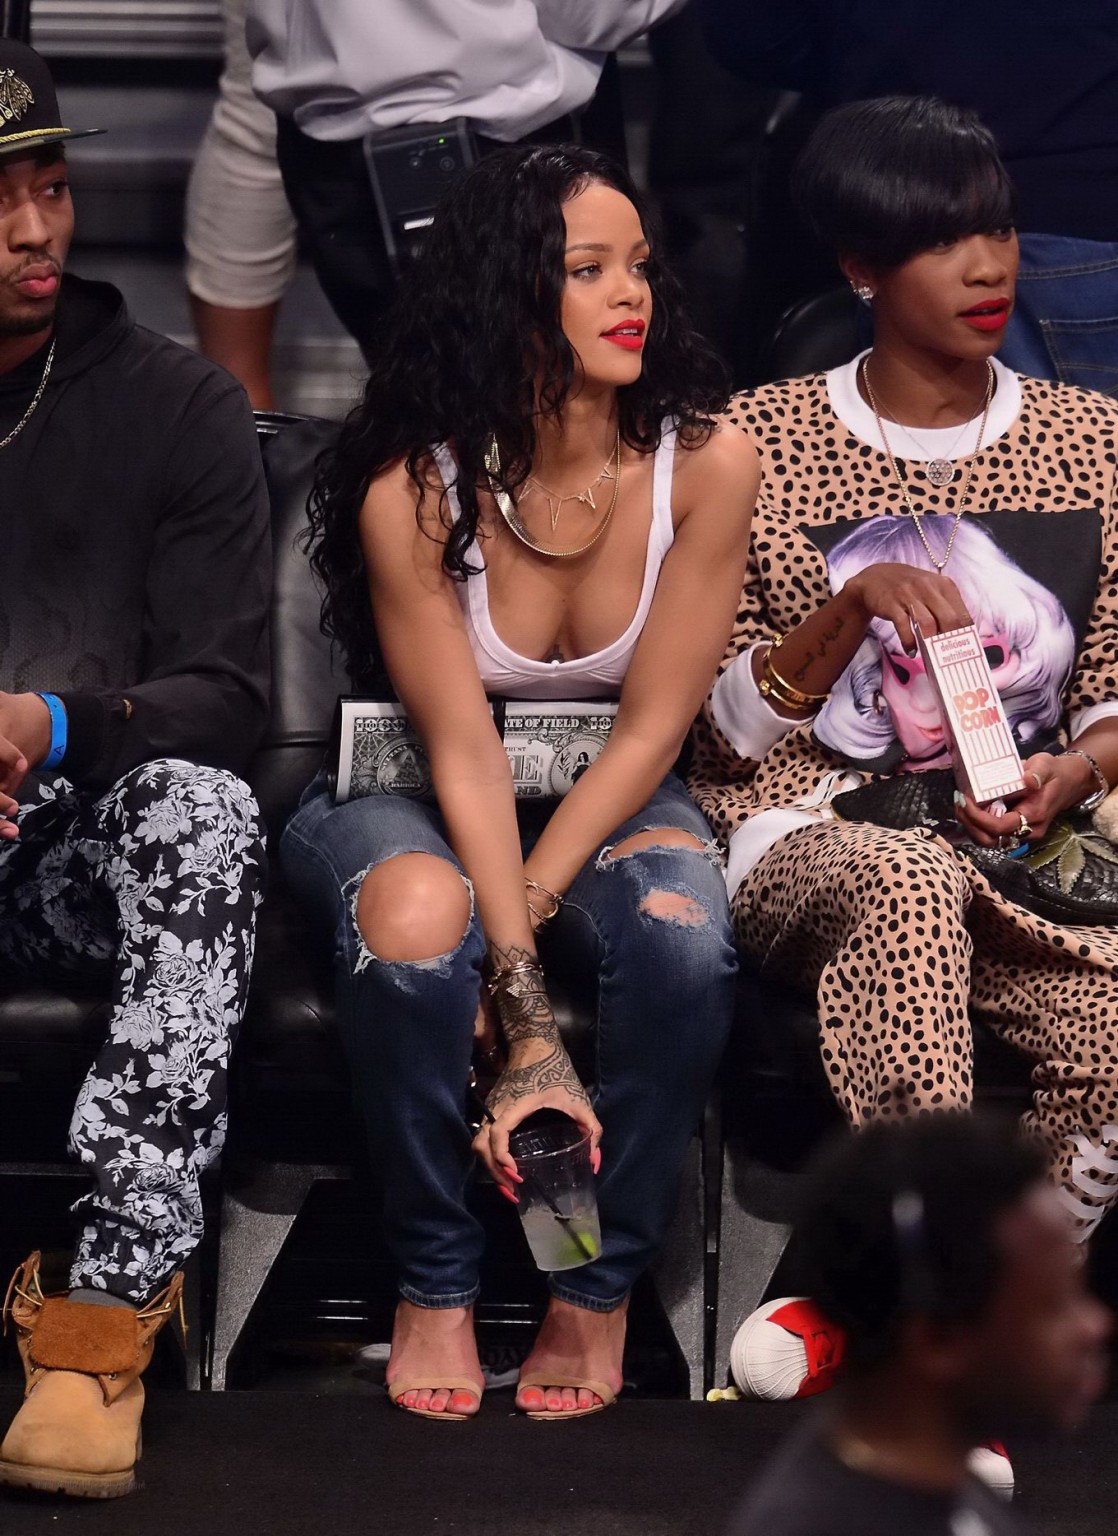 Rihanna shows off her boobs in seethru top at a basketball game in NYC #75198056